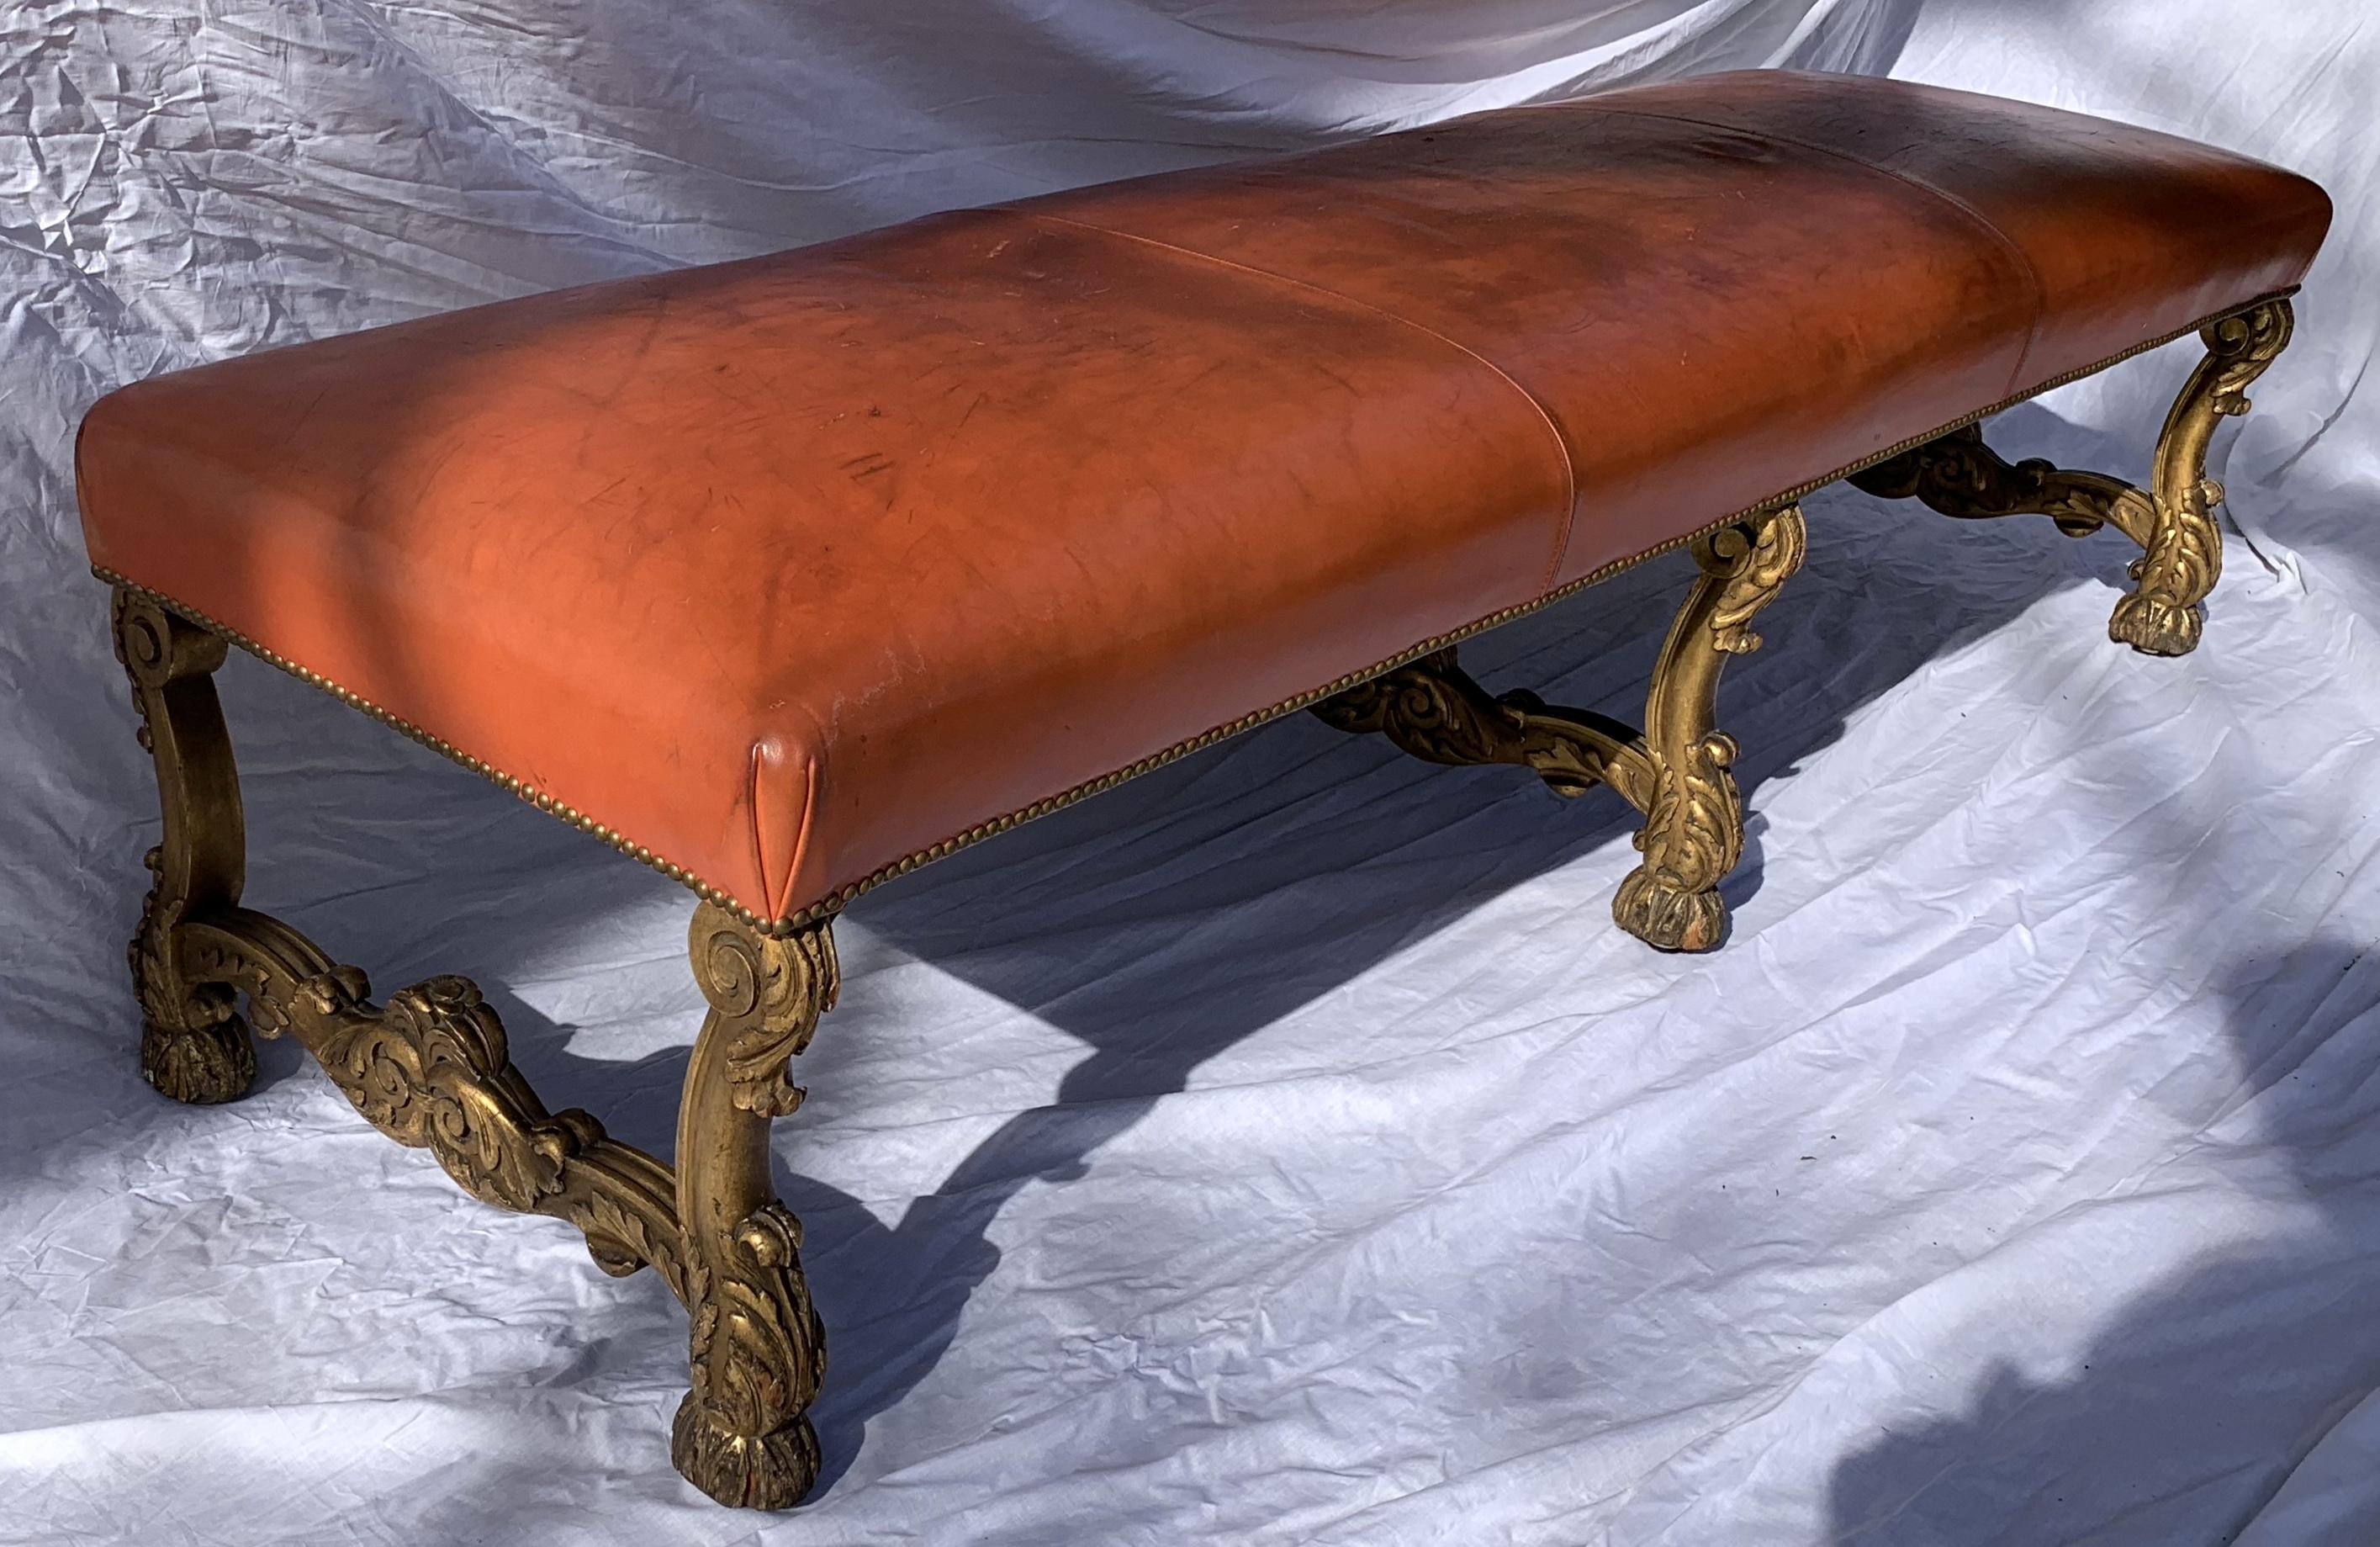 A wonderful French 19th century large regency rectangular carved giltwood nail head orange fine leather bench.
Minor wear to patina on legs and leather top.
 